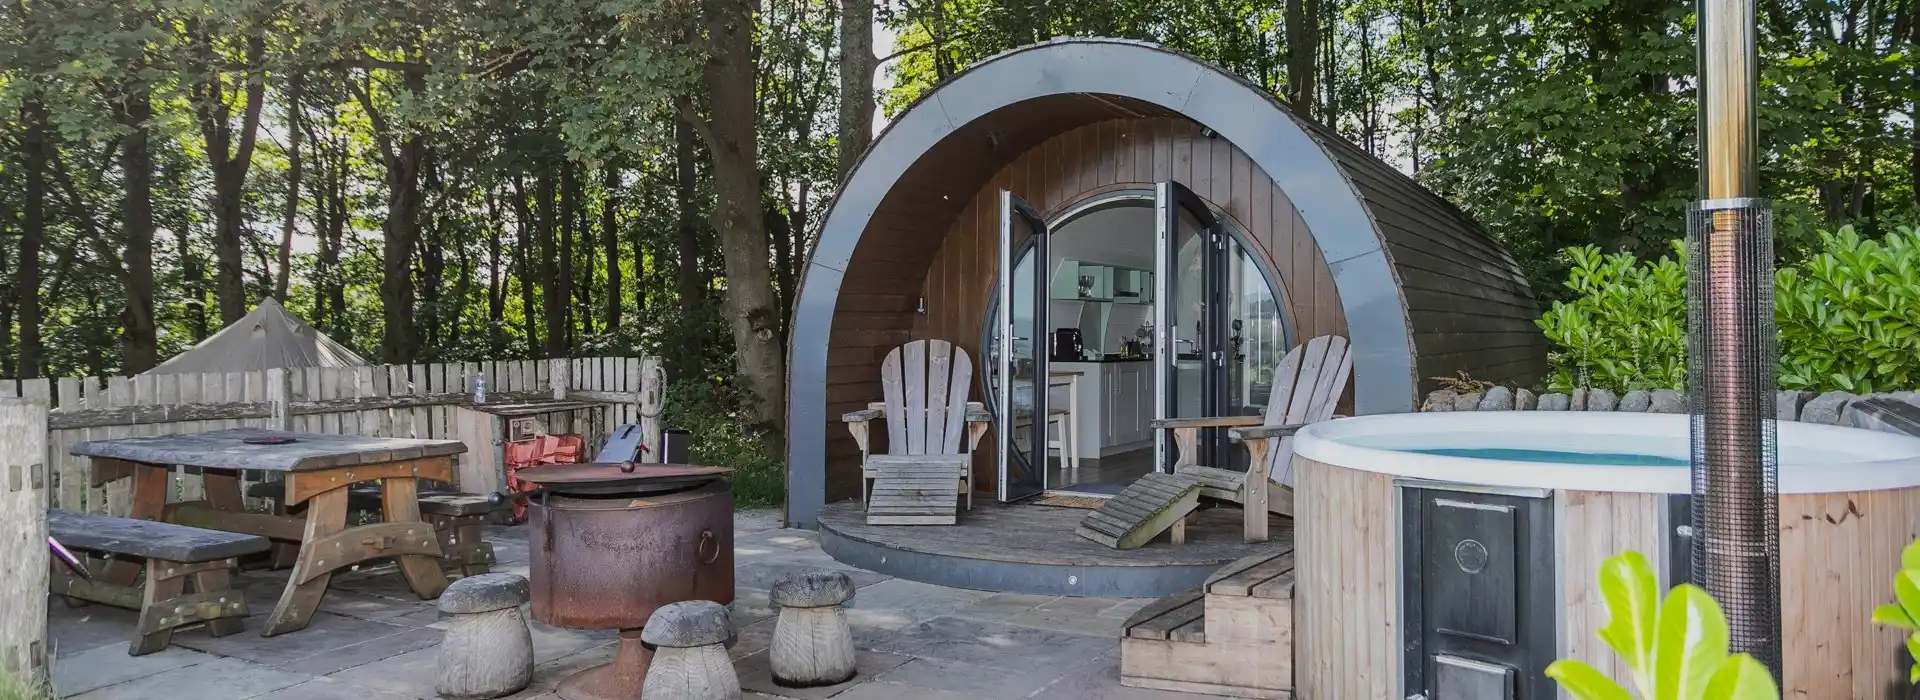 Camping and glamping pods with hot tubs in North Yorkshire